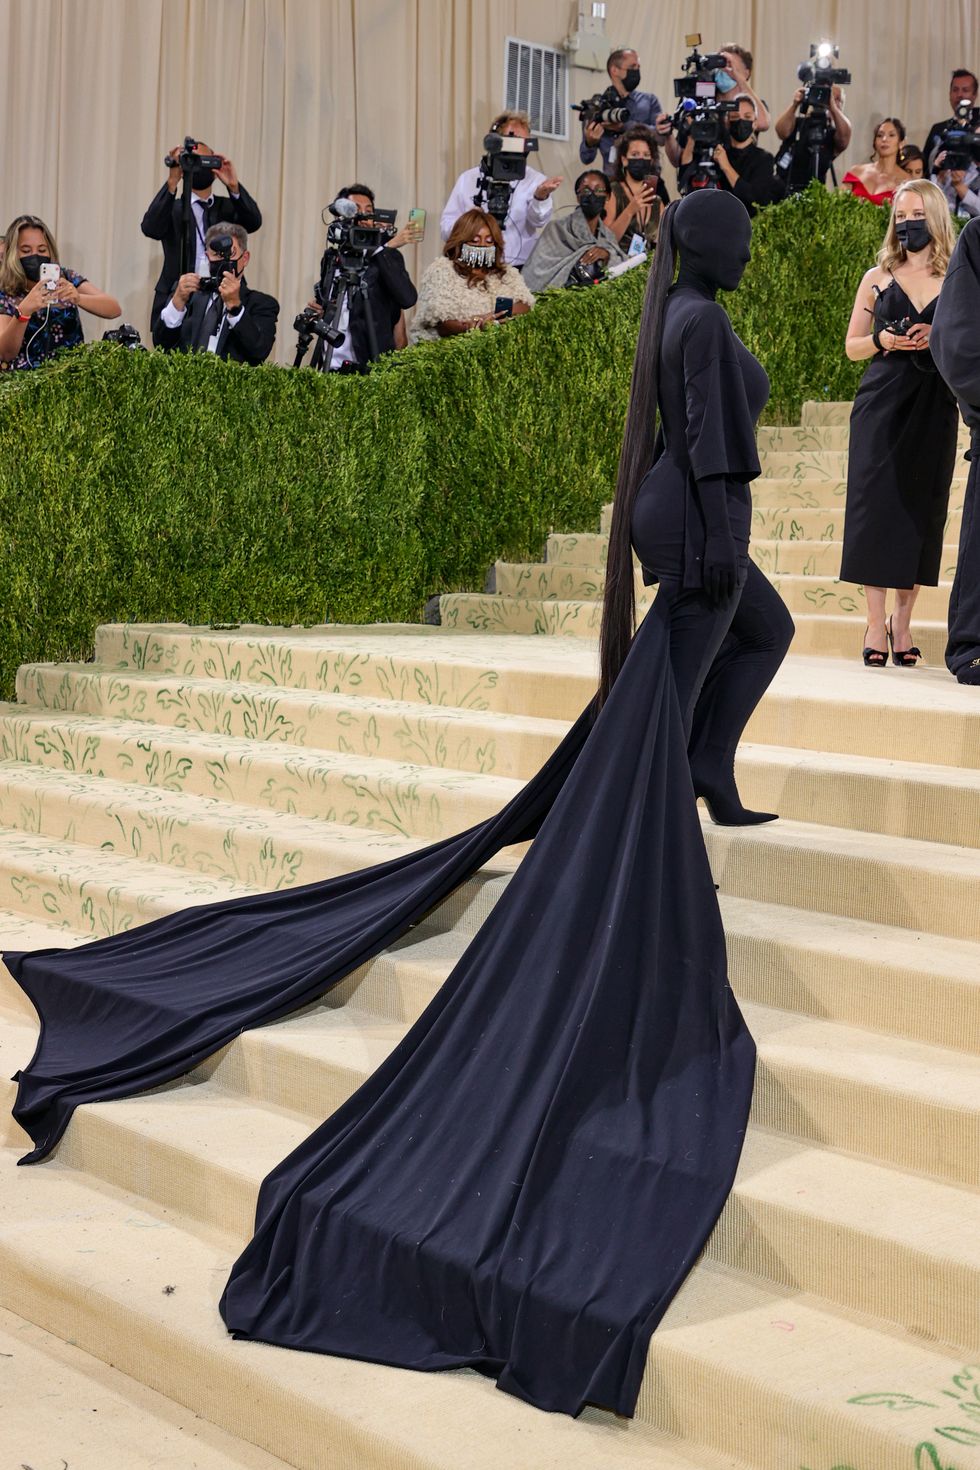 new york, new york   september 13 kim kardashian attends the 2021 met gala celebrating in america a lexicon of fashion at metropolitan museum of art on september 13, 2021 in new york city photo by theo wargogetty images